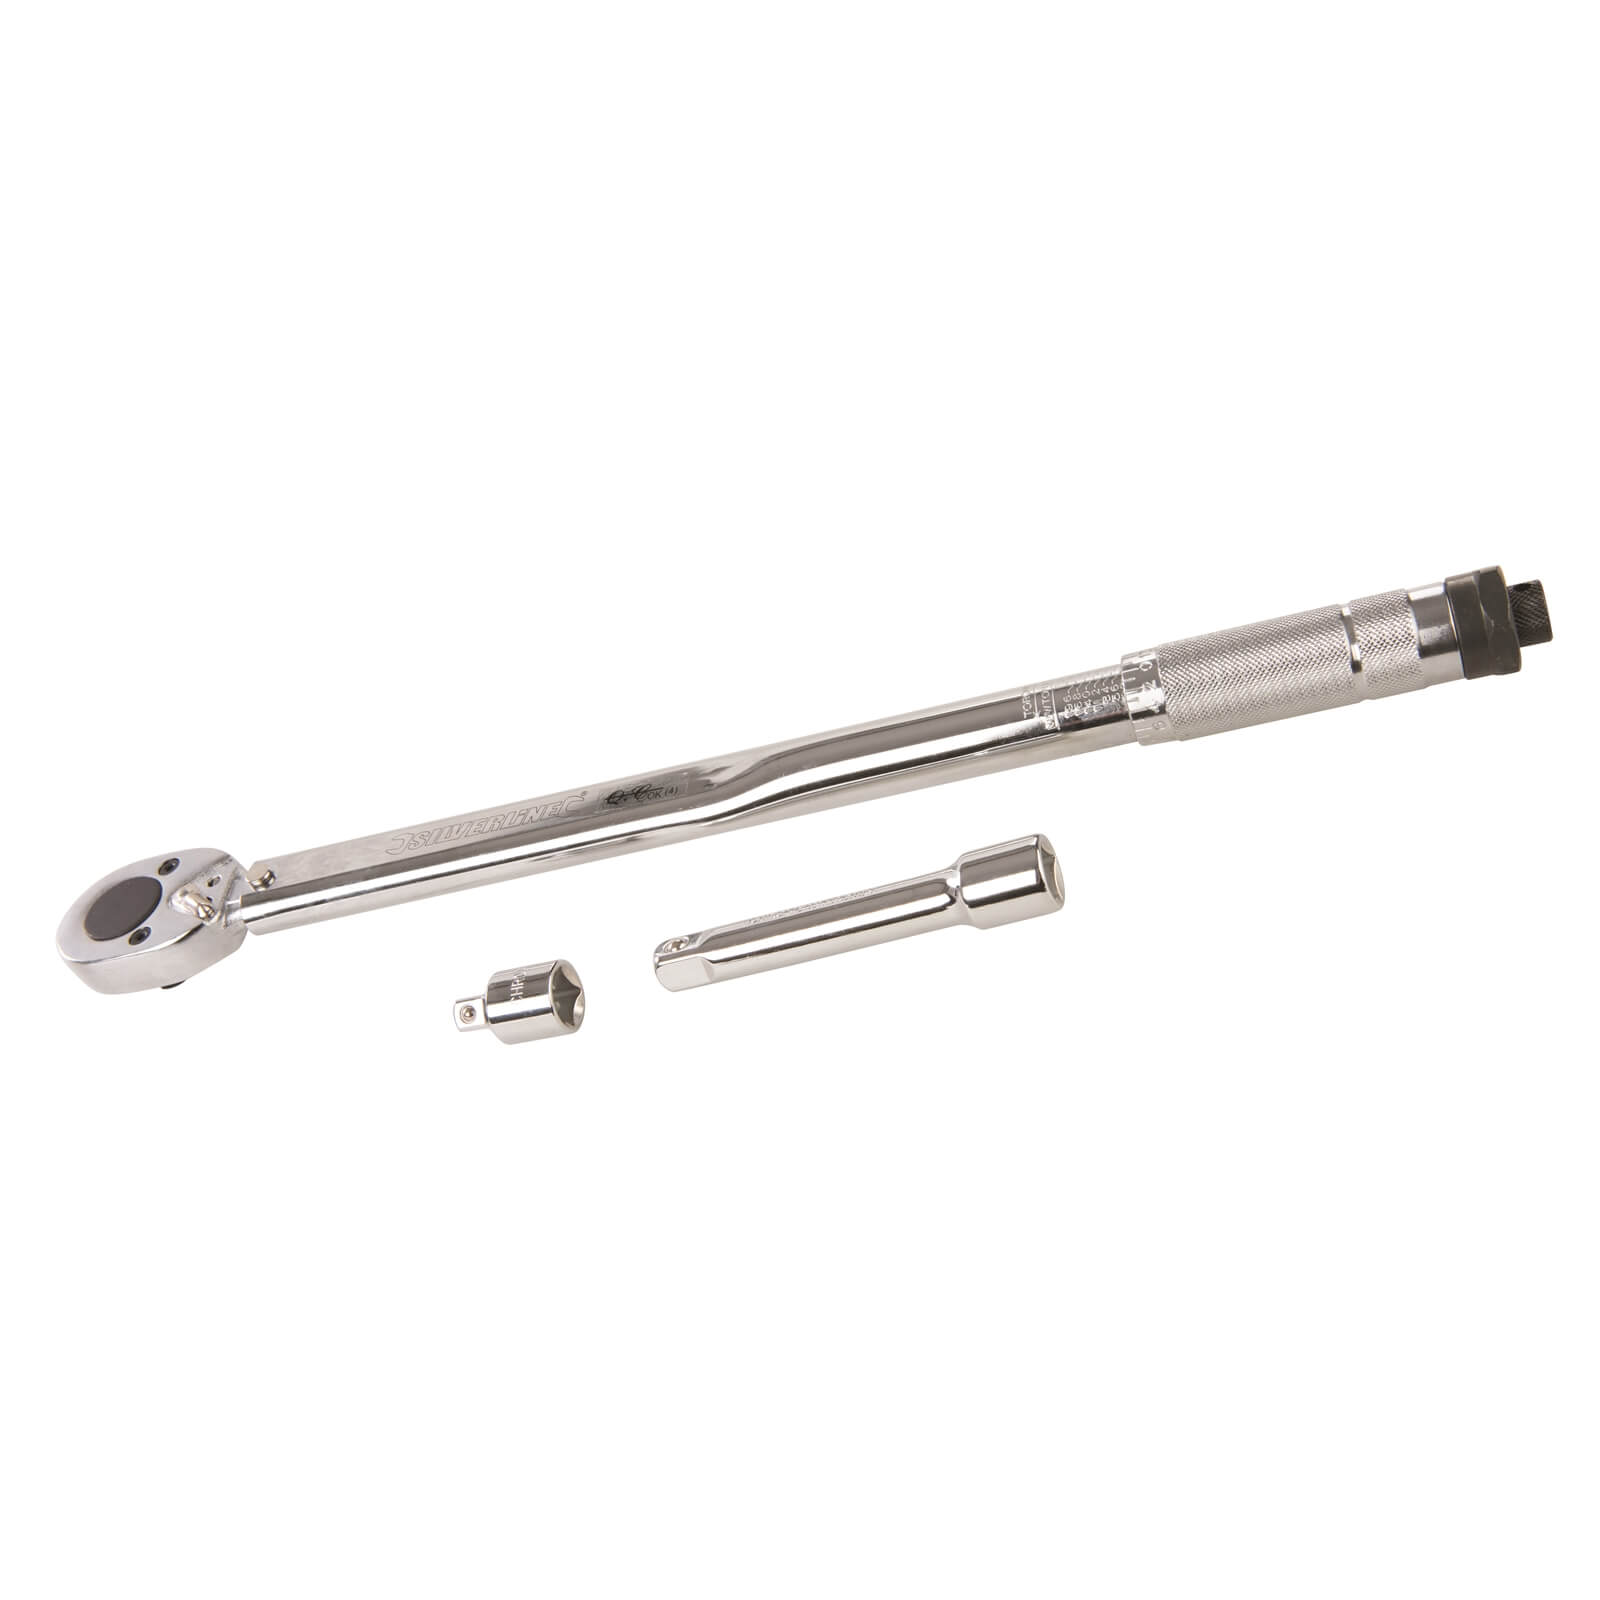 Silverline Torque Wrench 28 - 210Nm 1/2 Drive